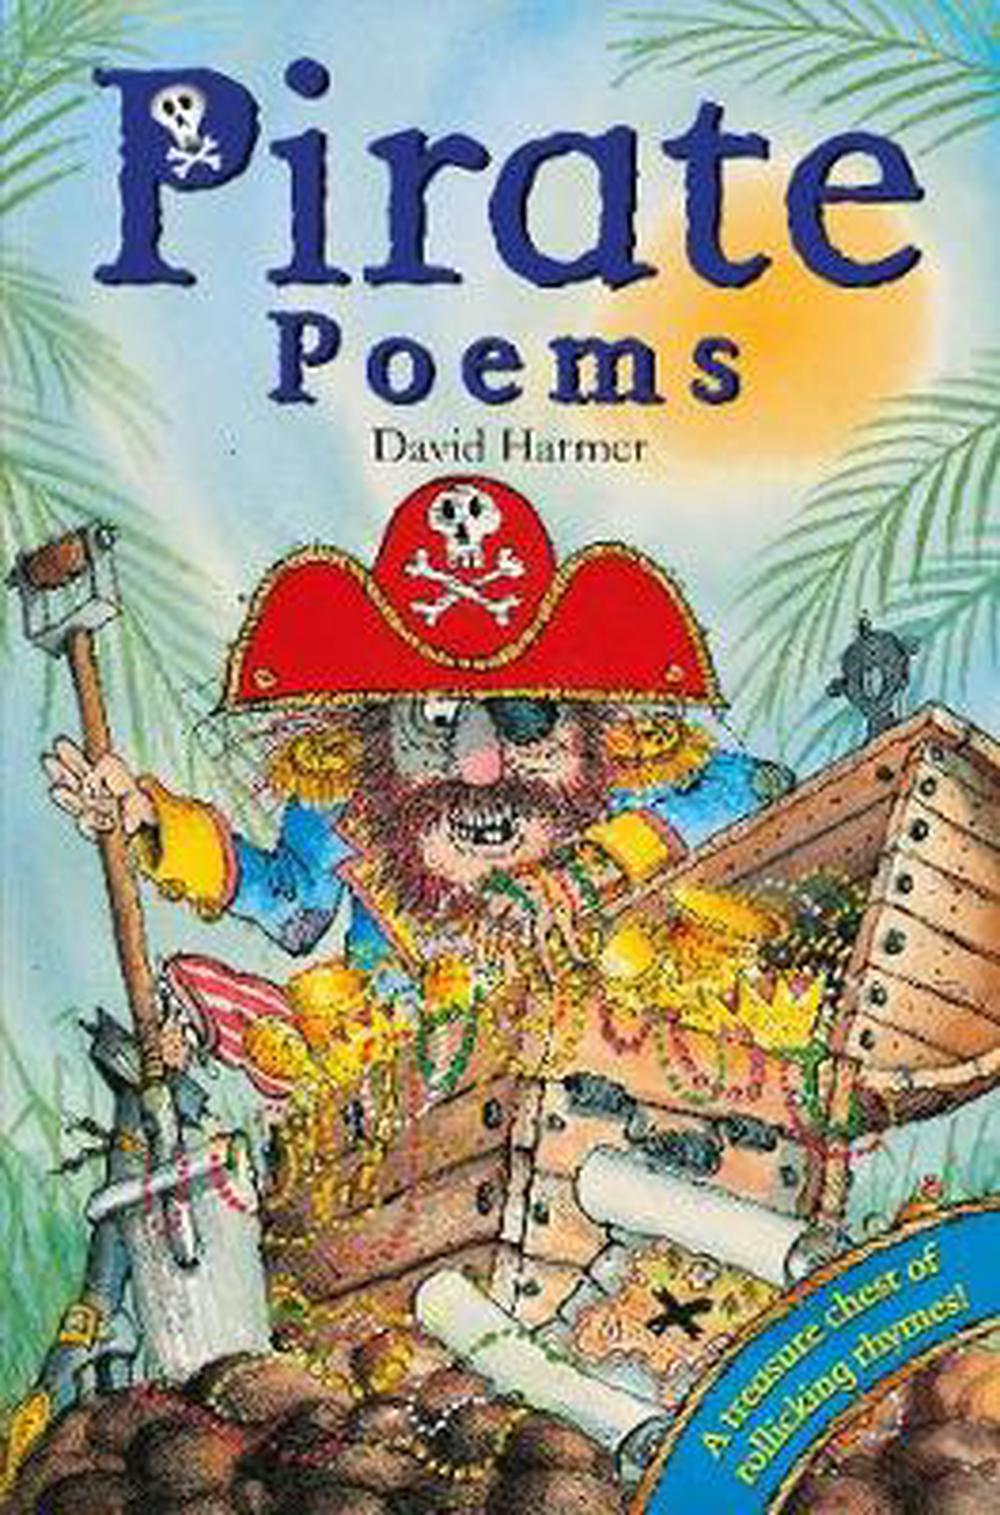 Pirate Poems by David Harmer, Paperback, 9780330451819 | Buy online at ...